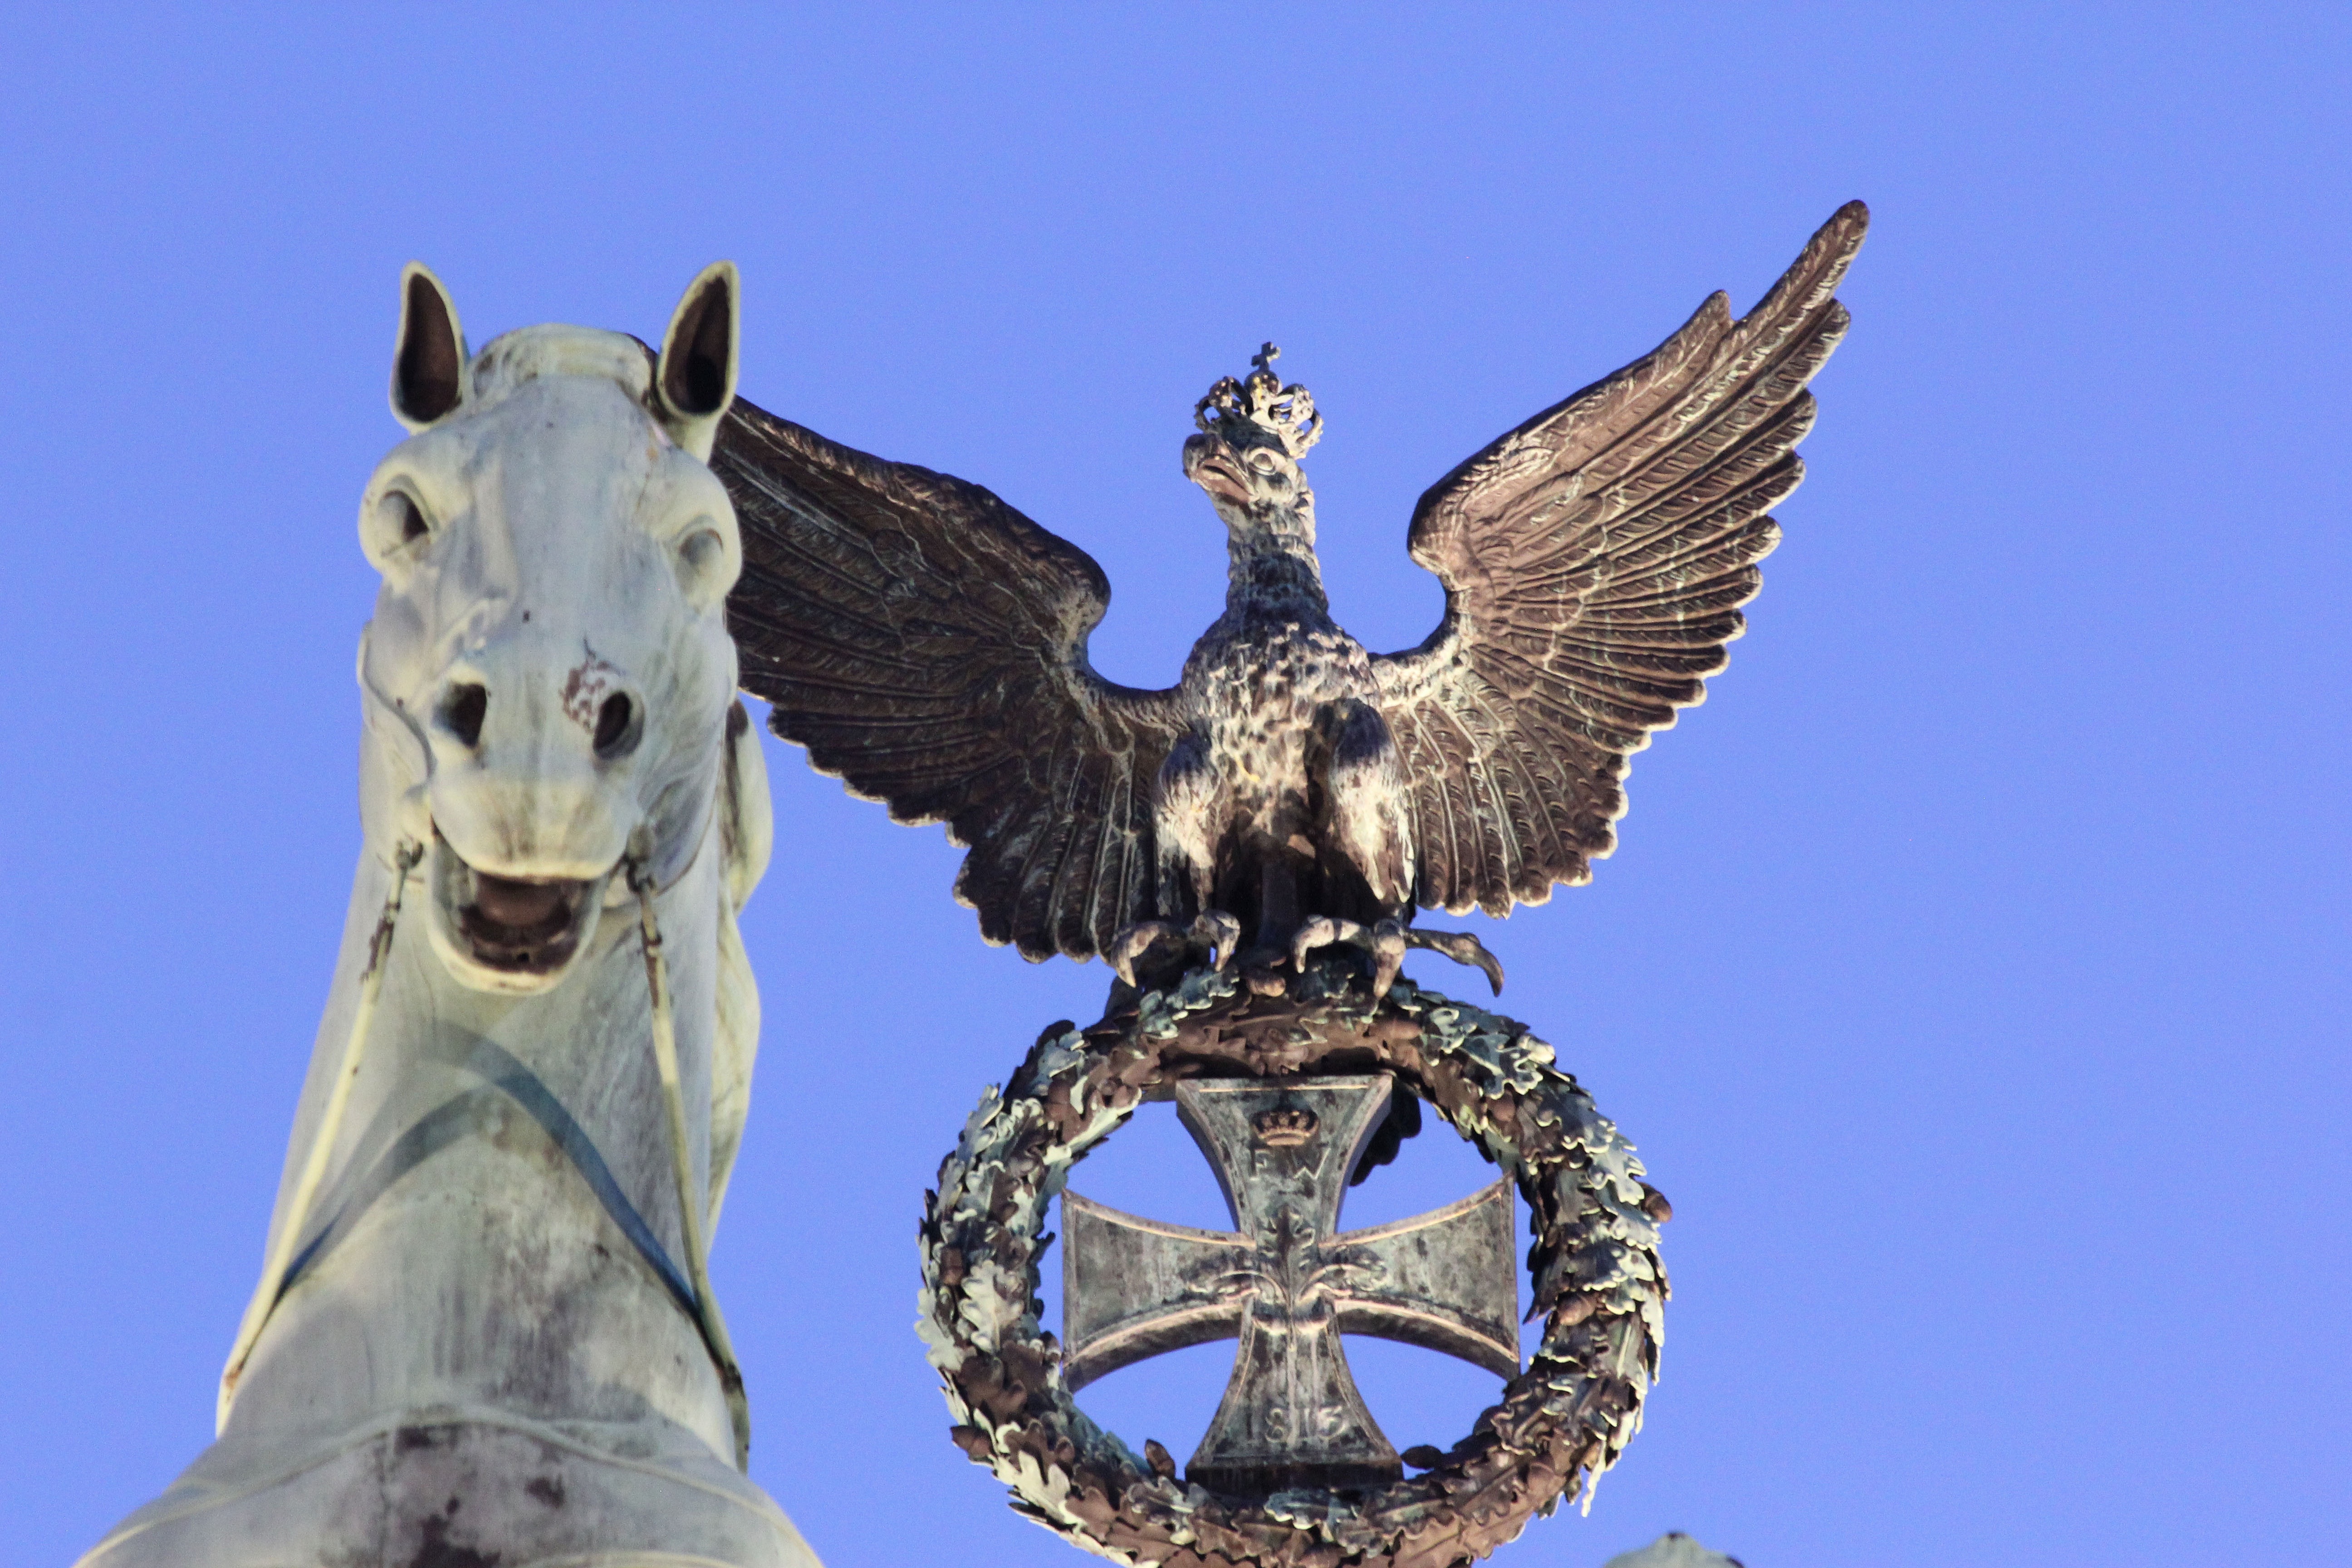 horse and eagle with crown statue